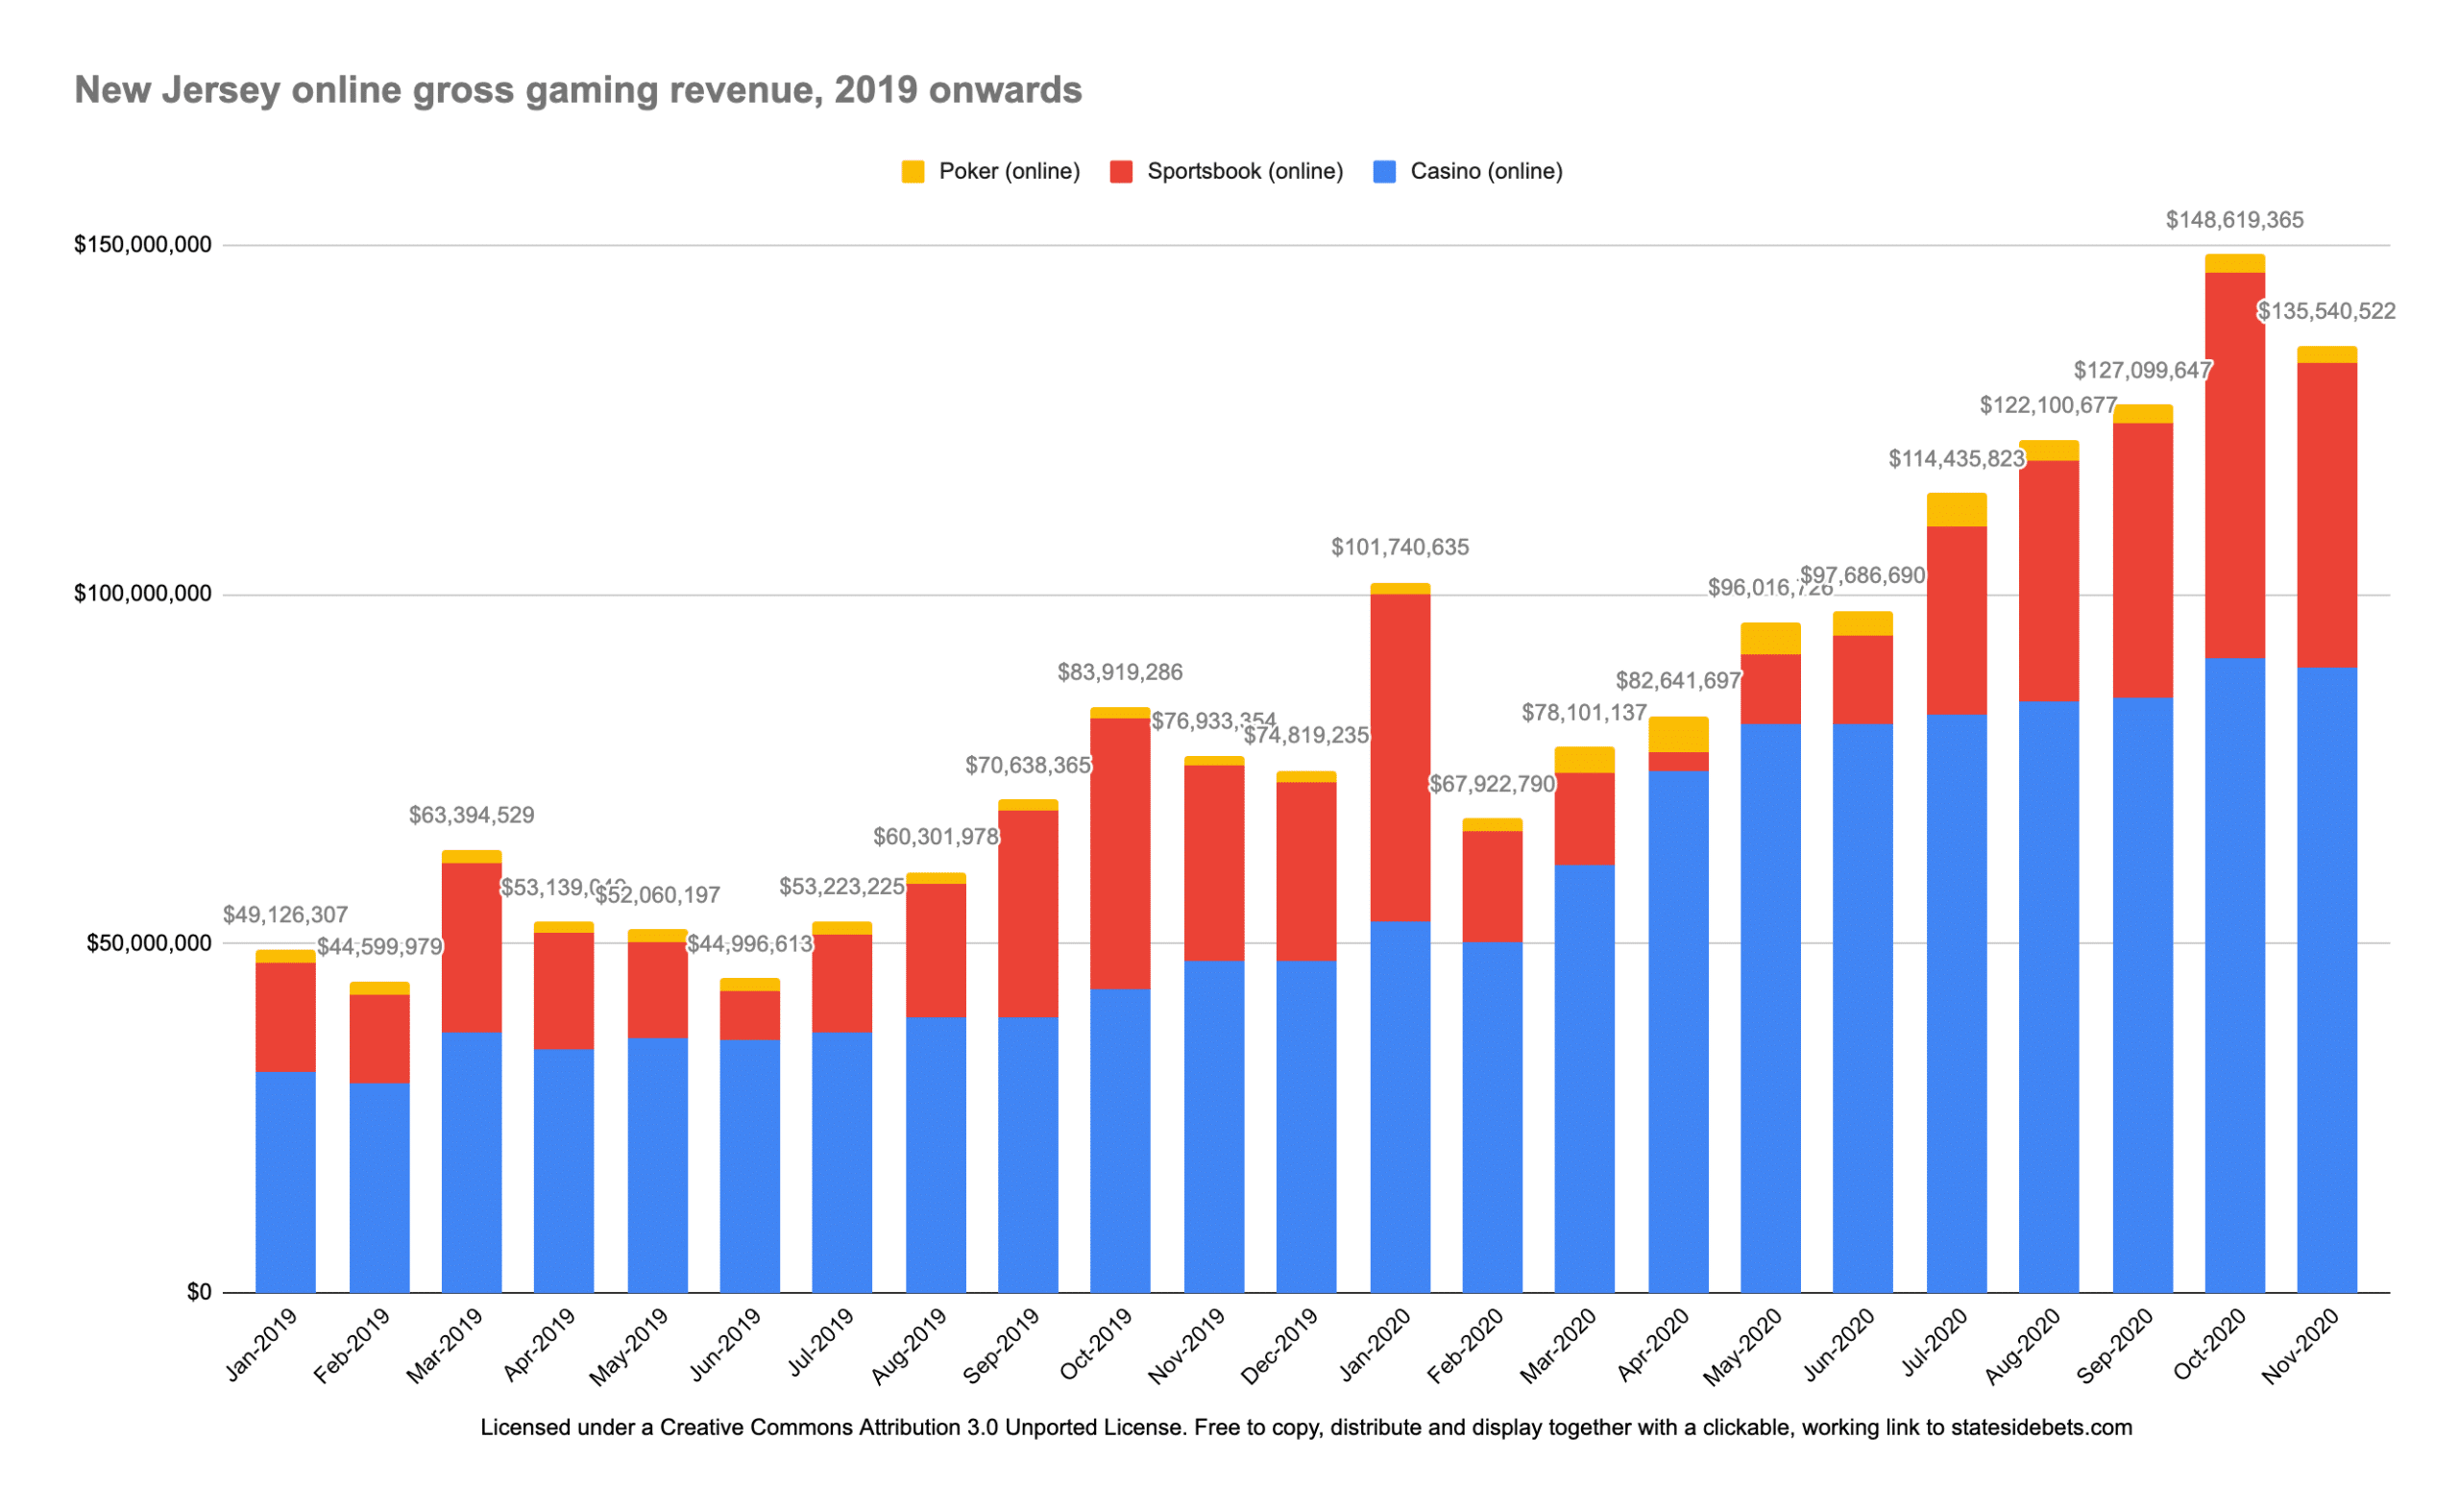 This chart shows total online gross gambling revenue in New Jersey from Jan 2019 onwards. The chart includes casino, sportsbook and poker figures. Top figure shows the monthly online combined revenue.